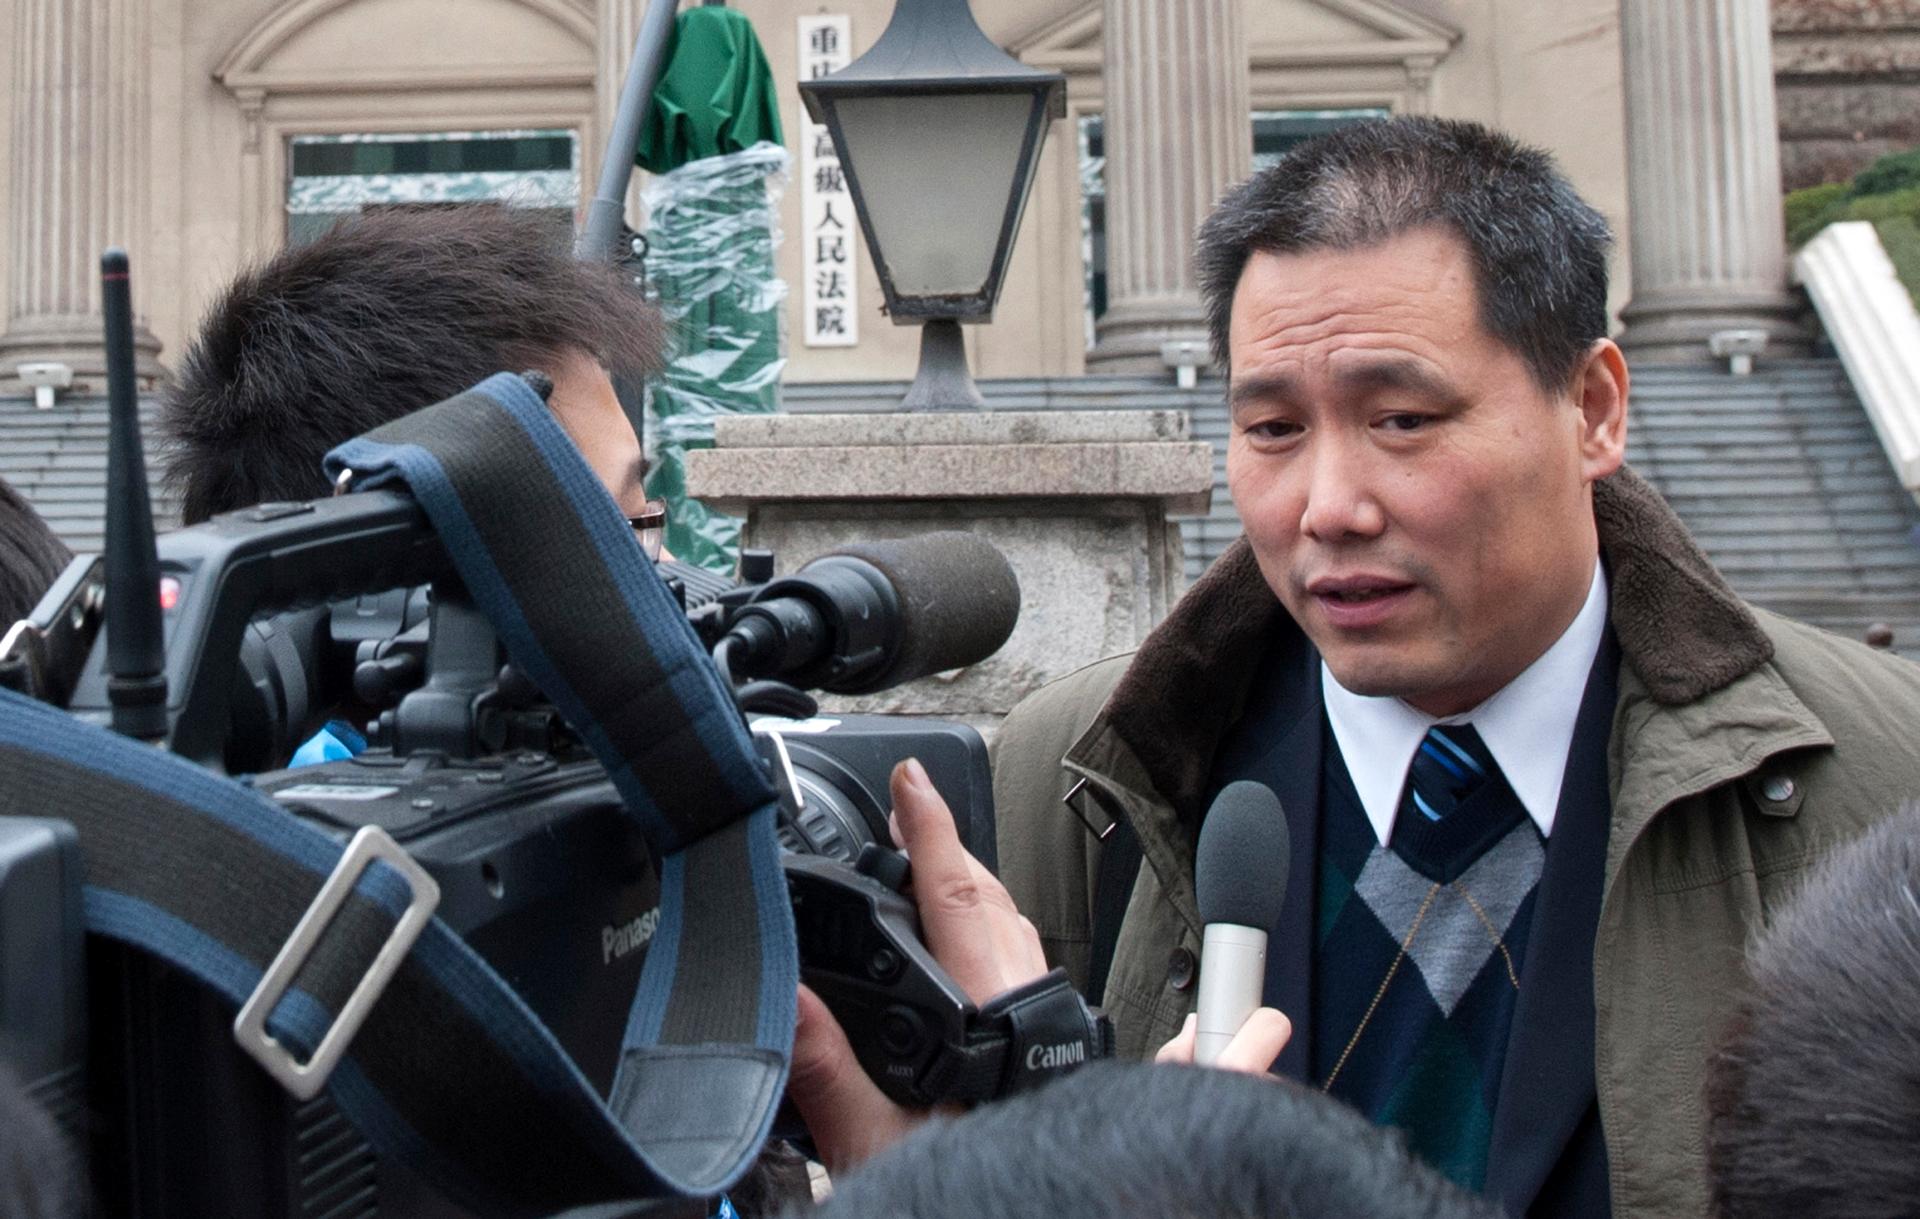 Chinese lawyer Pu Zhiqiang (right) speaks to journalists outside a Chinese courthouse on December 28, 2012. China has detained Pu, a prominent human rights lawyer, after he attended a meeting that urged a probe into the bloody suppression of pro-democracy